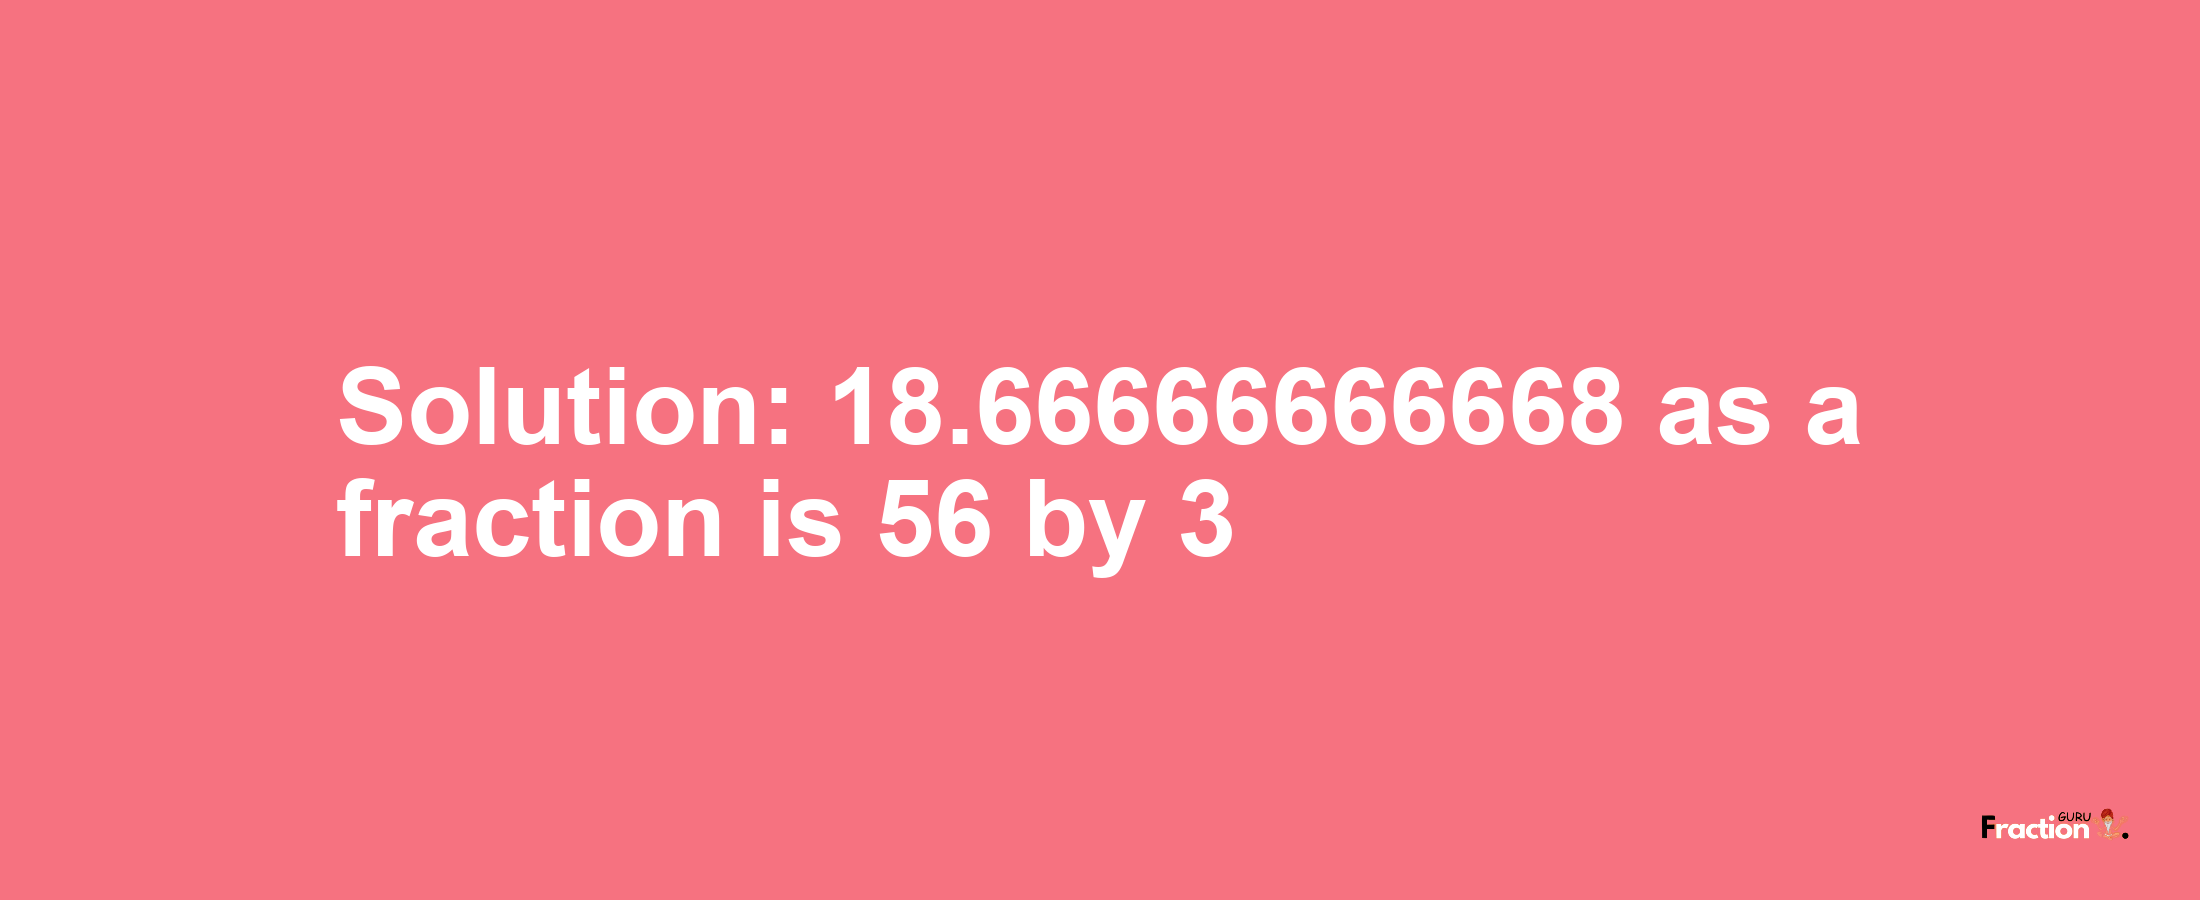 Solution:18.66666666668 as a fraction is 56/3